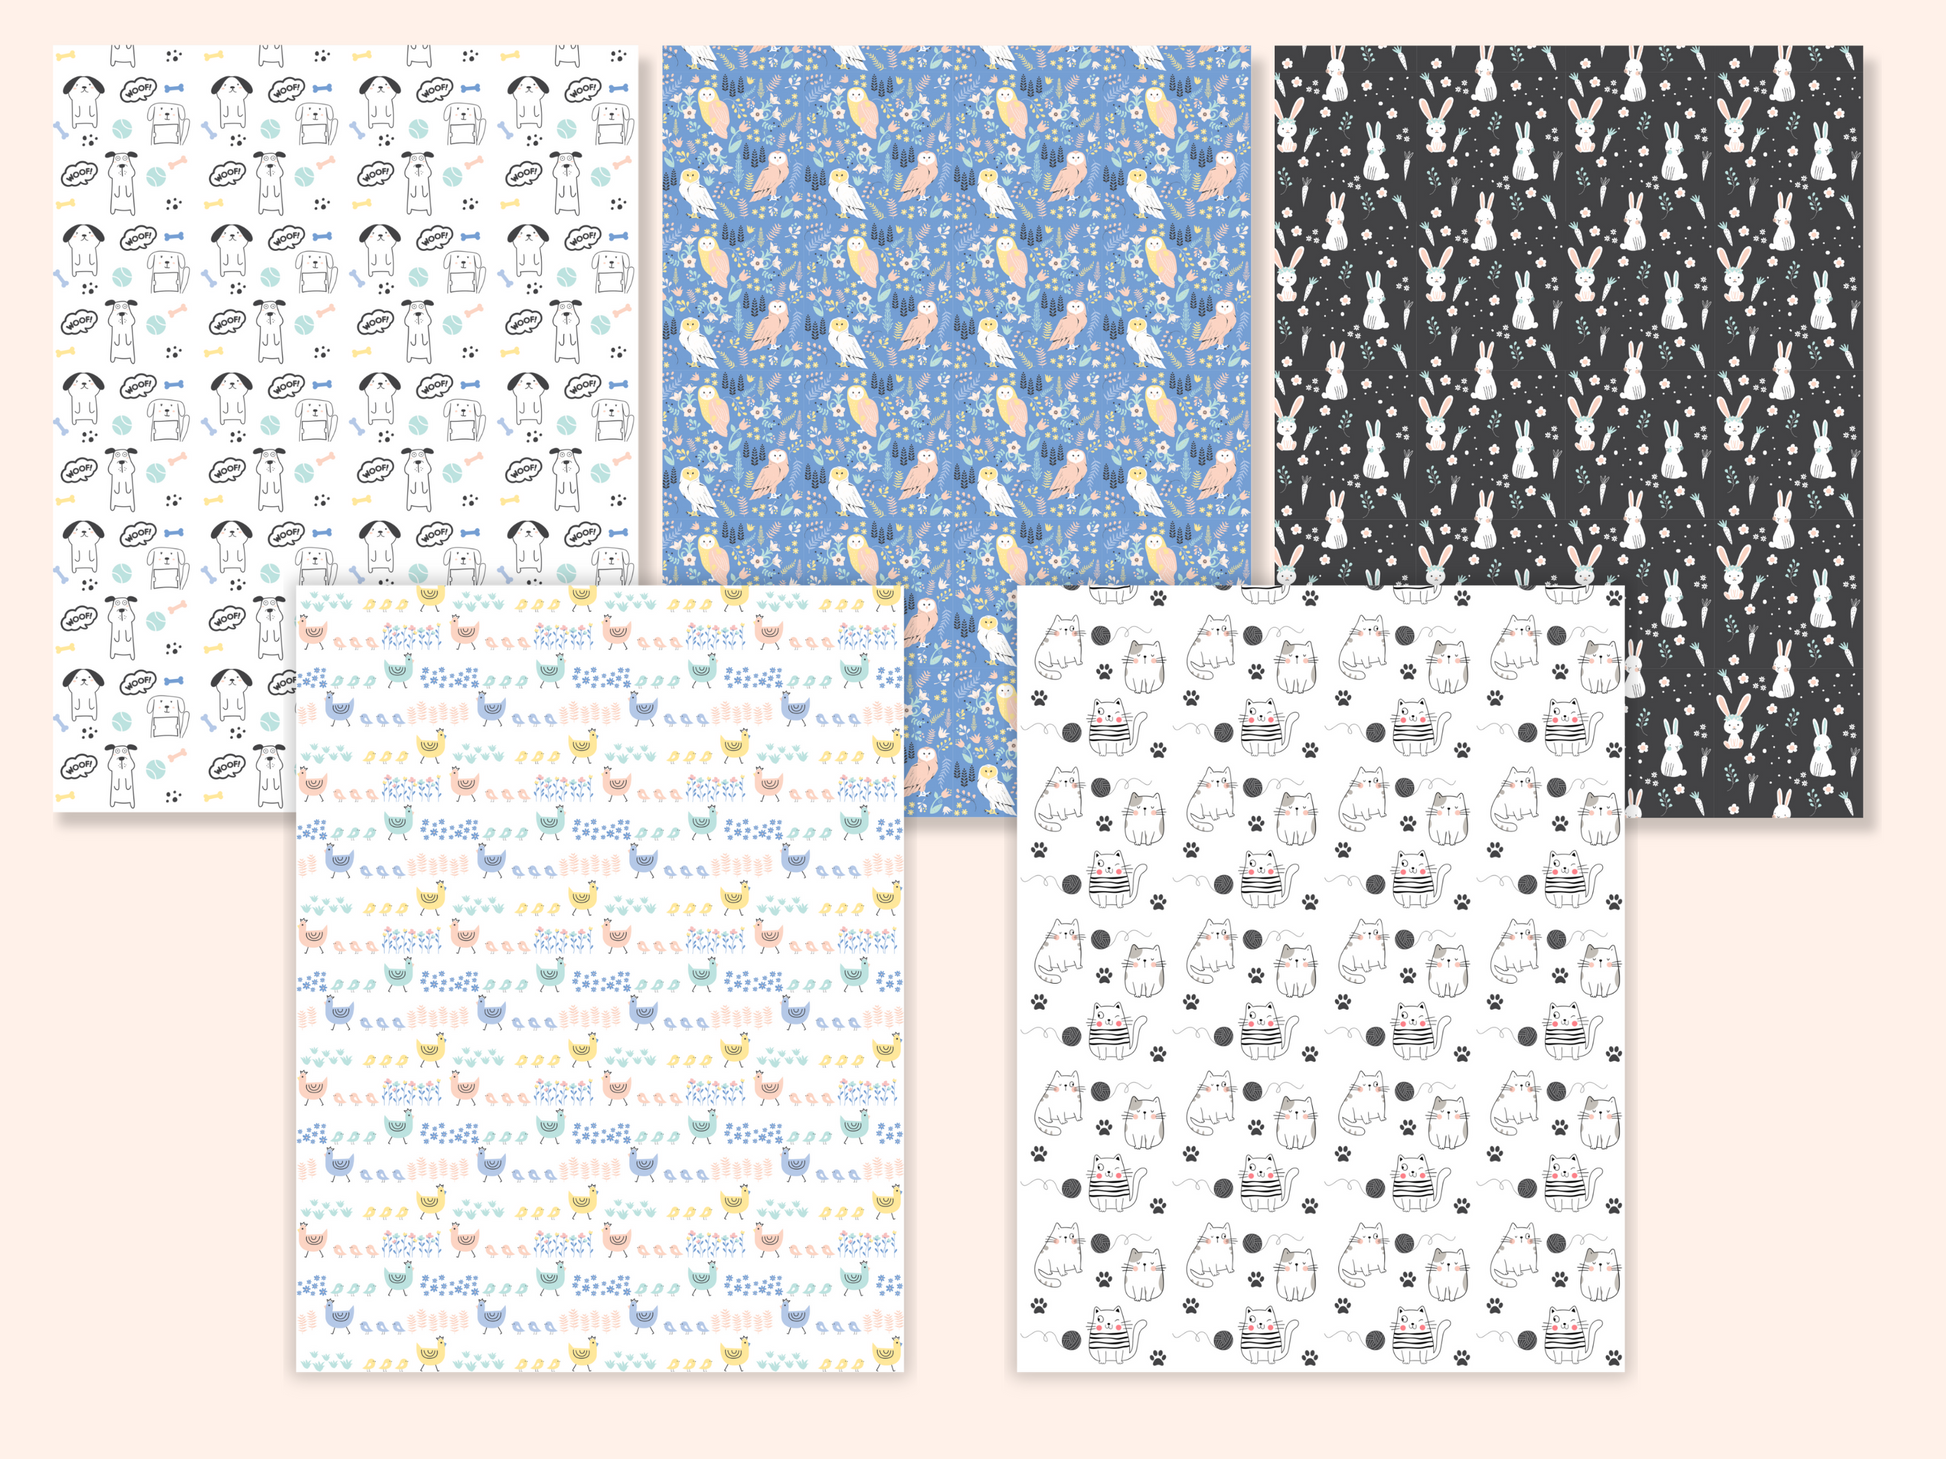 5 dollhouse wallpaper sheets with 5 different pet patterns presented as full sheets side by side